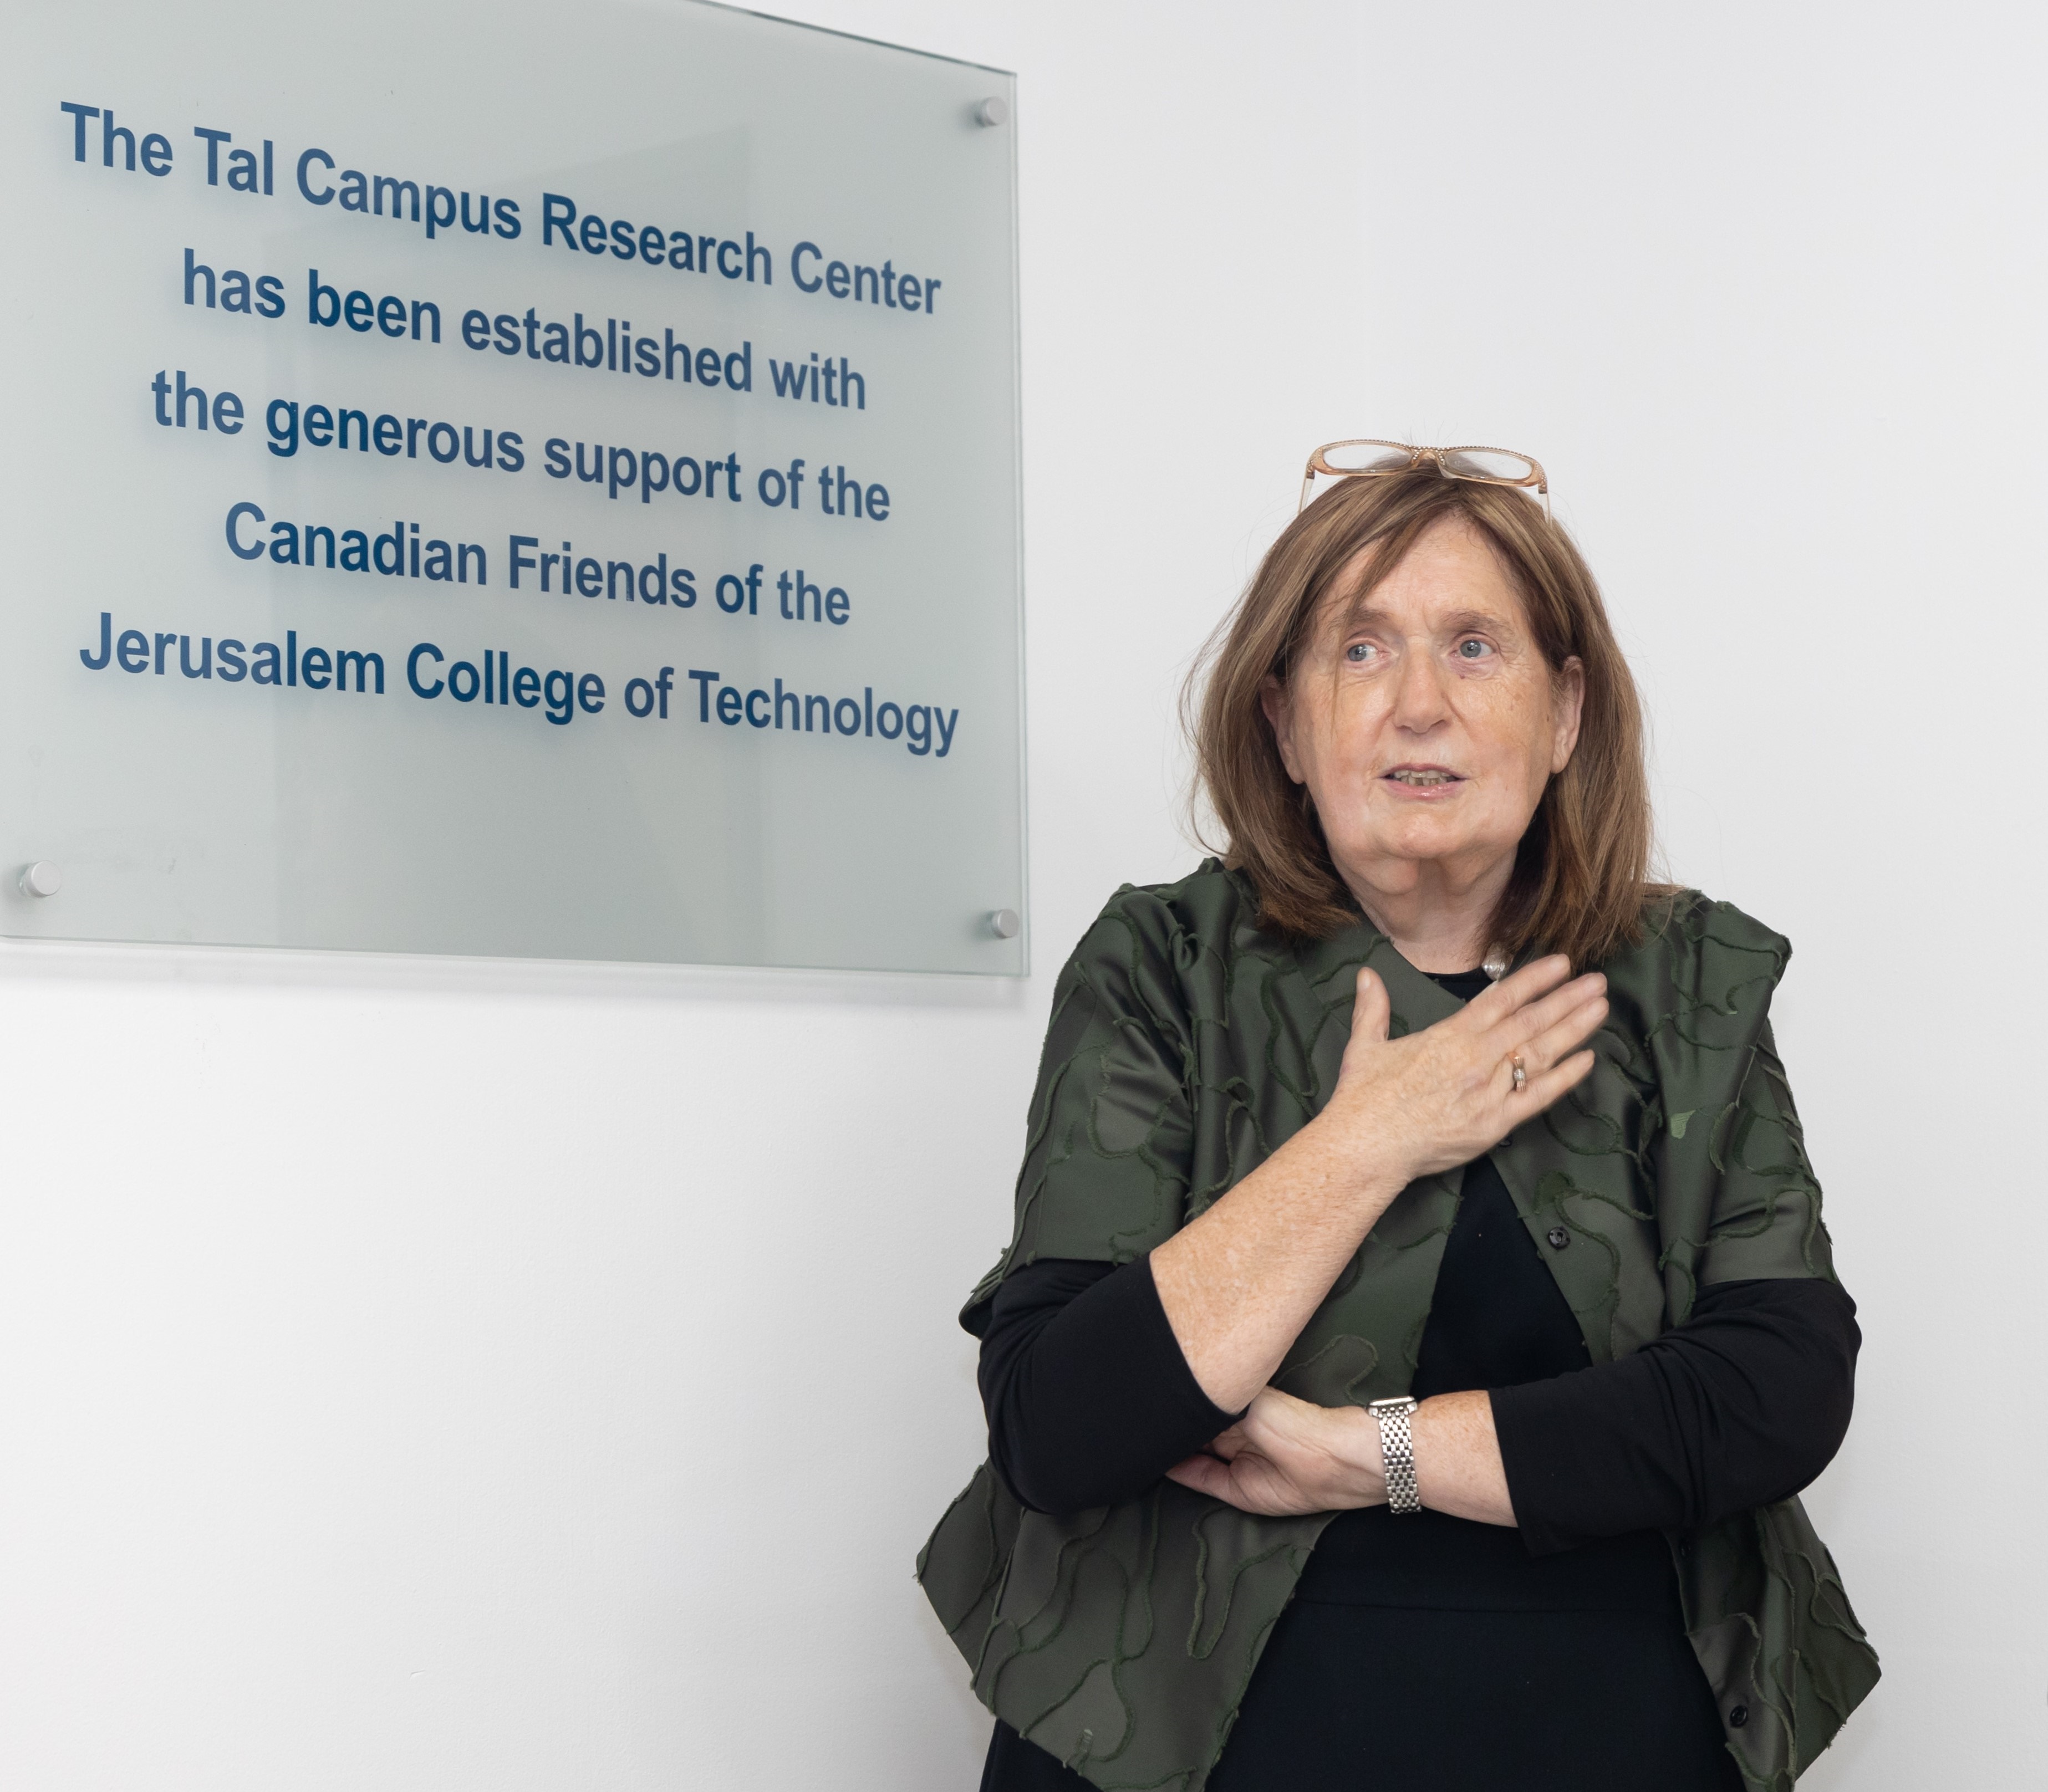 New research center on Tal campus